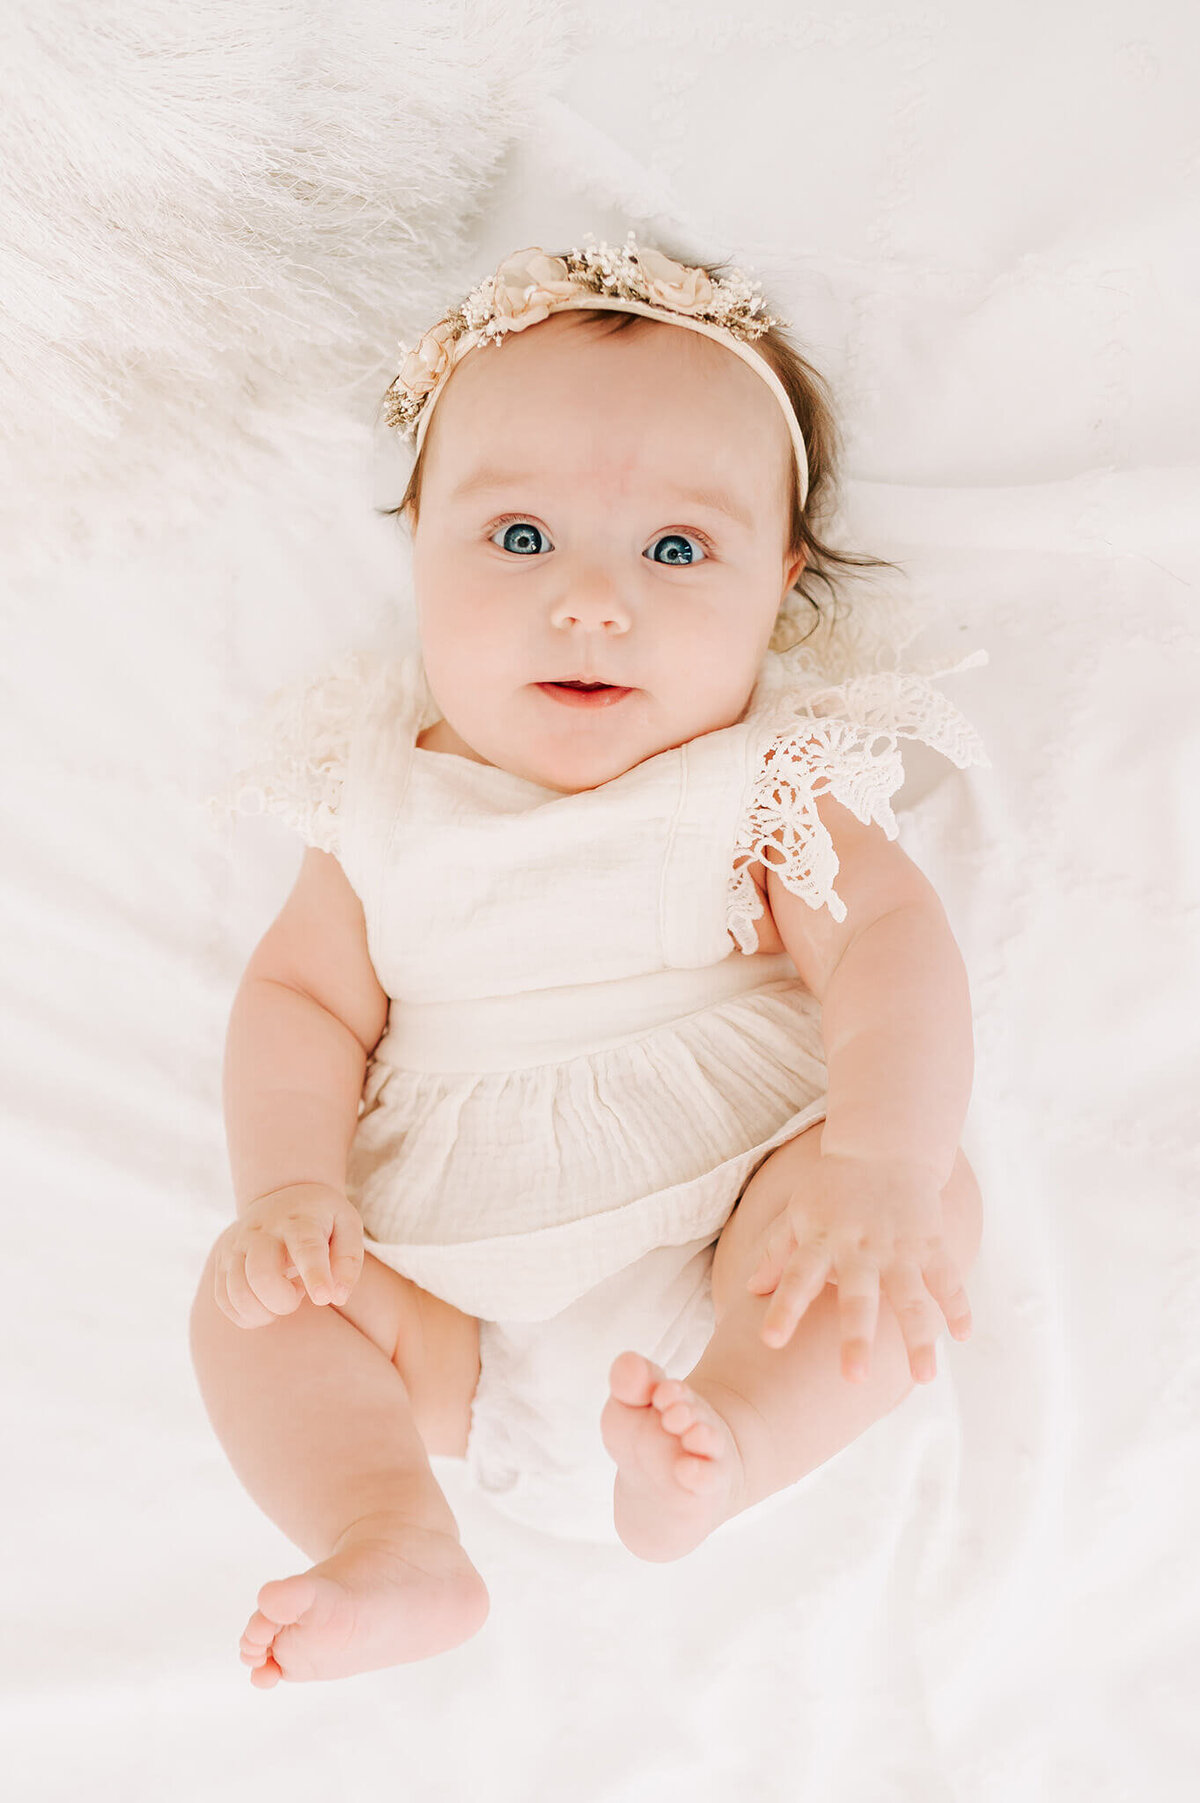 Springfield MO family photographer The XO Photography captures baby girl in white laying on bed